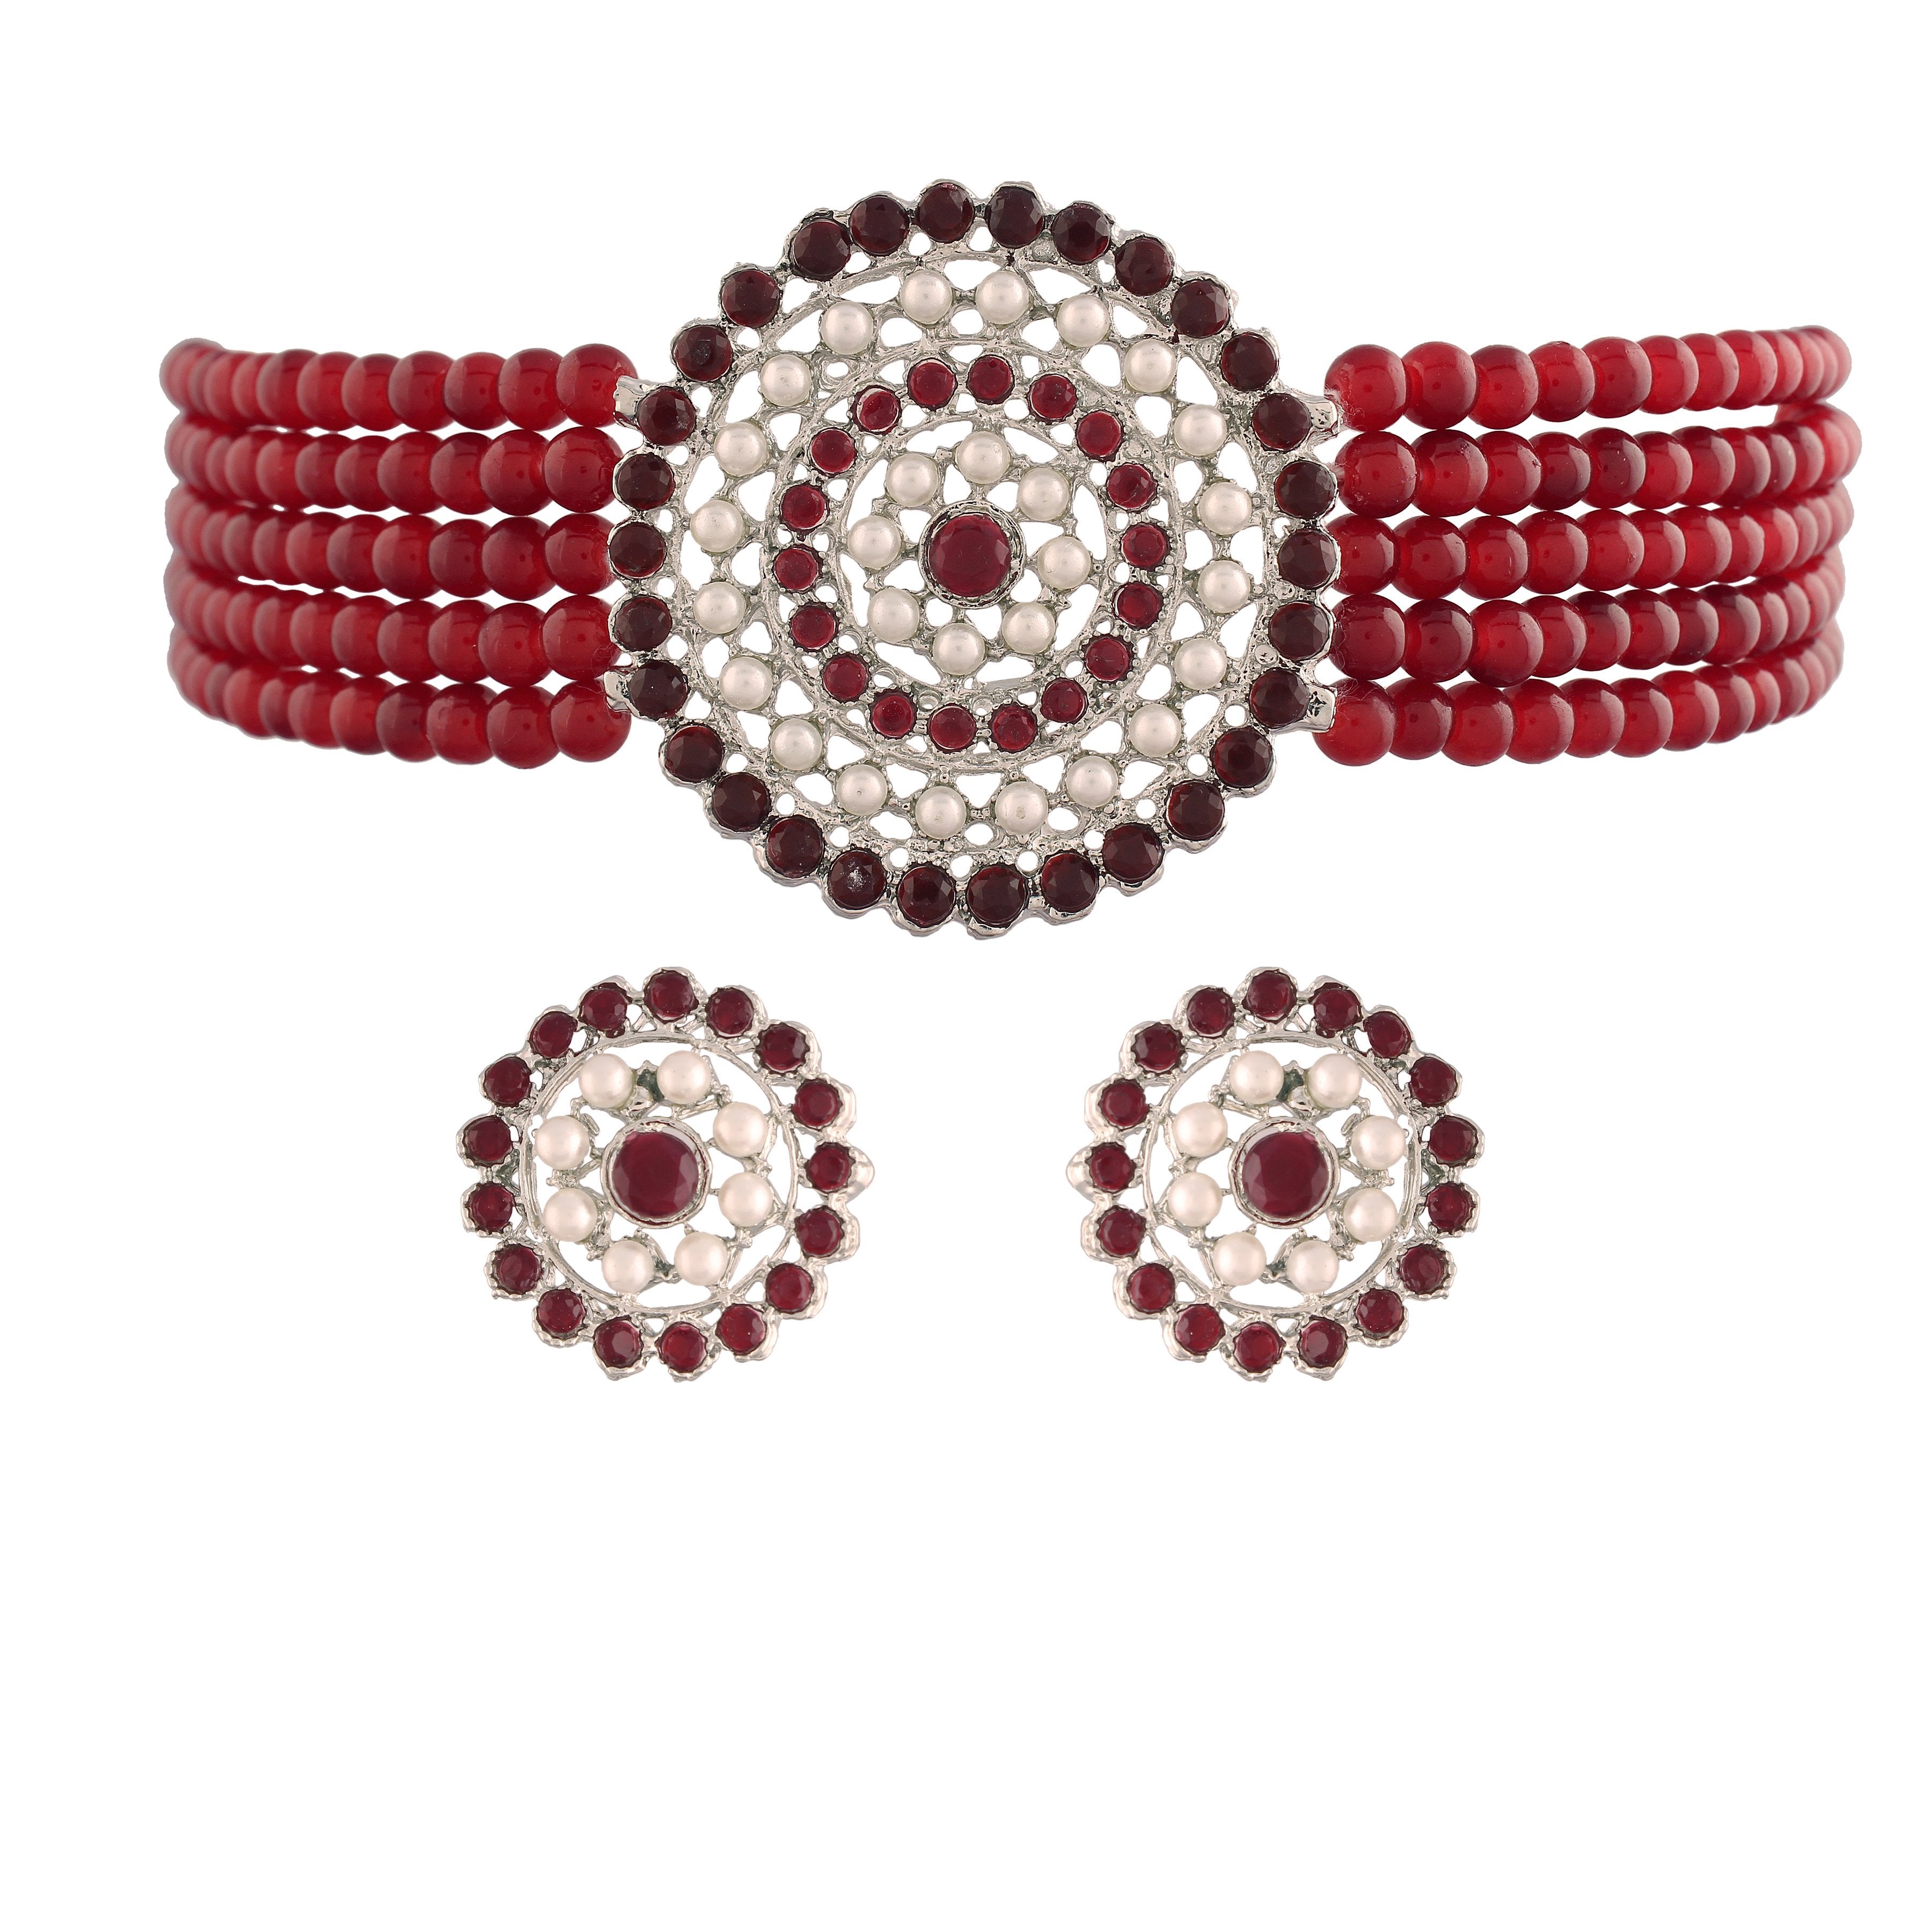 Women's Rhodium Plated Maroon Ethnic Light Weight Pearl Beaded Choker Necklace Set - i jewels